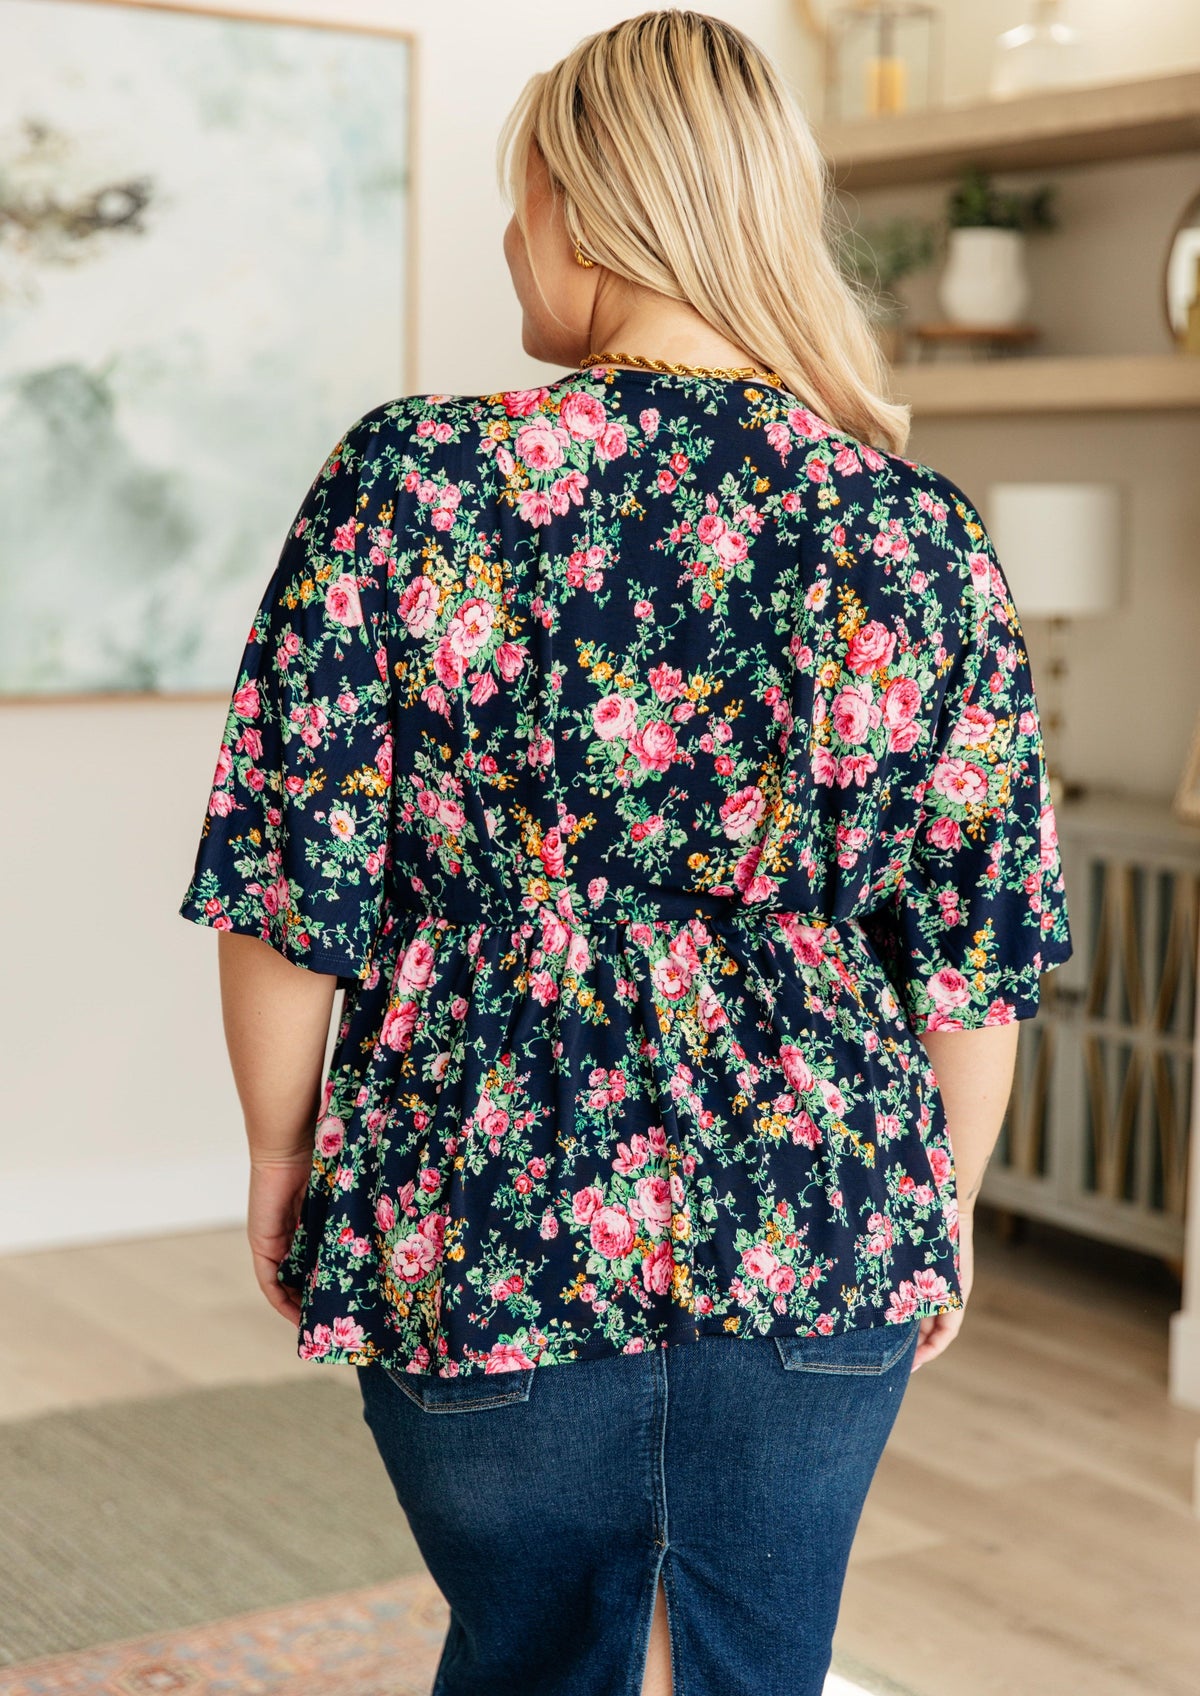 Dreamer Top in Navy and Pink Vintage Bouquet - becauseofadi